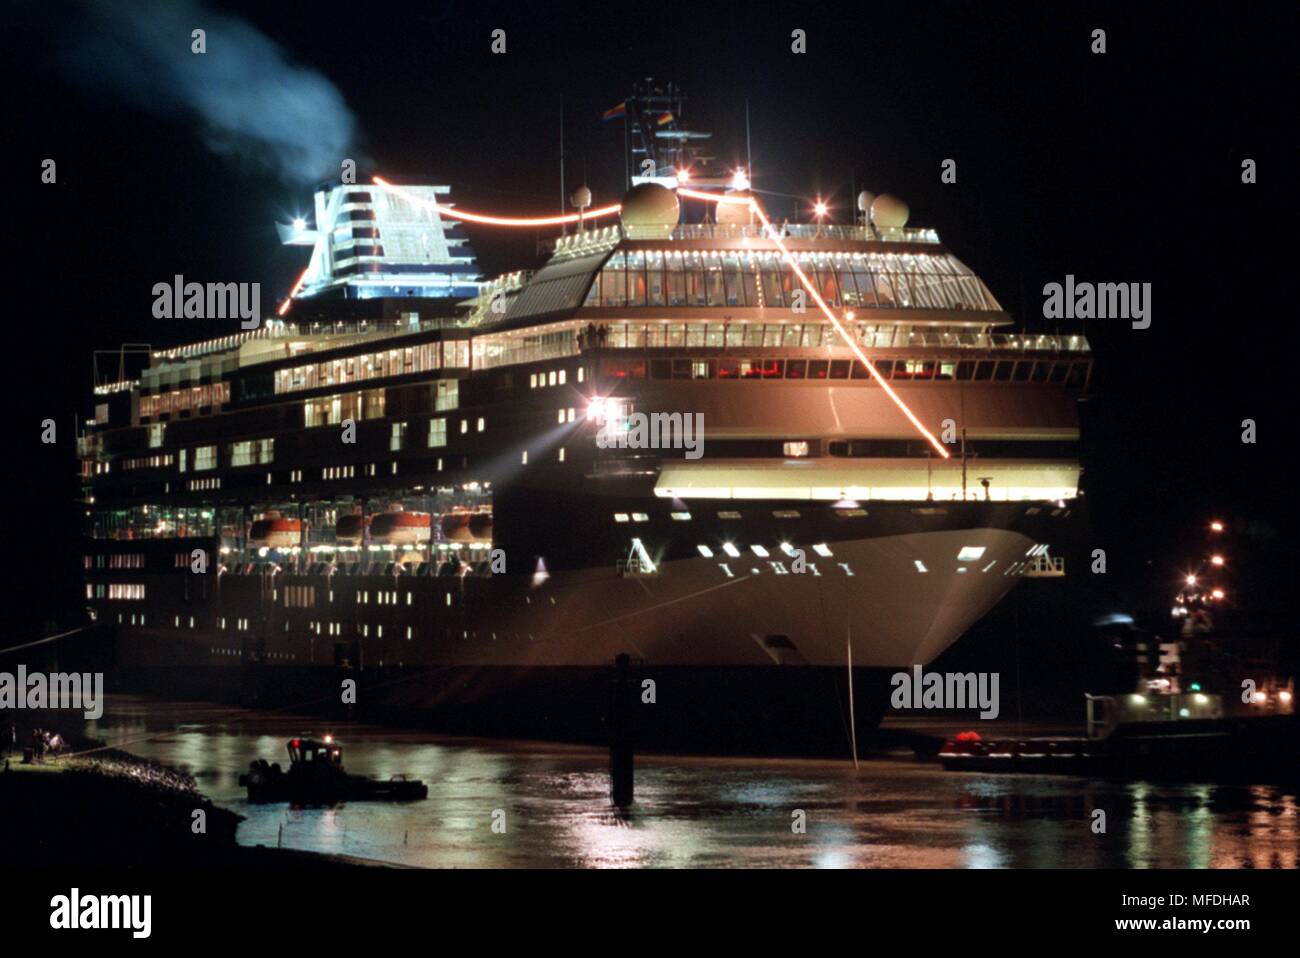 The luxury cruise ship 'Galaxy', built at Papenburg's Meyer shipyard, will continue its Uberfuhrungsfahrt on the Ems to the Dutch North Sea port Emshaven in the aftert 17.10.1996 at Leer. There, the interior of the 77700 gt large ocean liner is to be completed. After extensive test drives in the North Sea, the ship will be handed over to the end of November in Hamburg. | usage worldwide Stock Photo